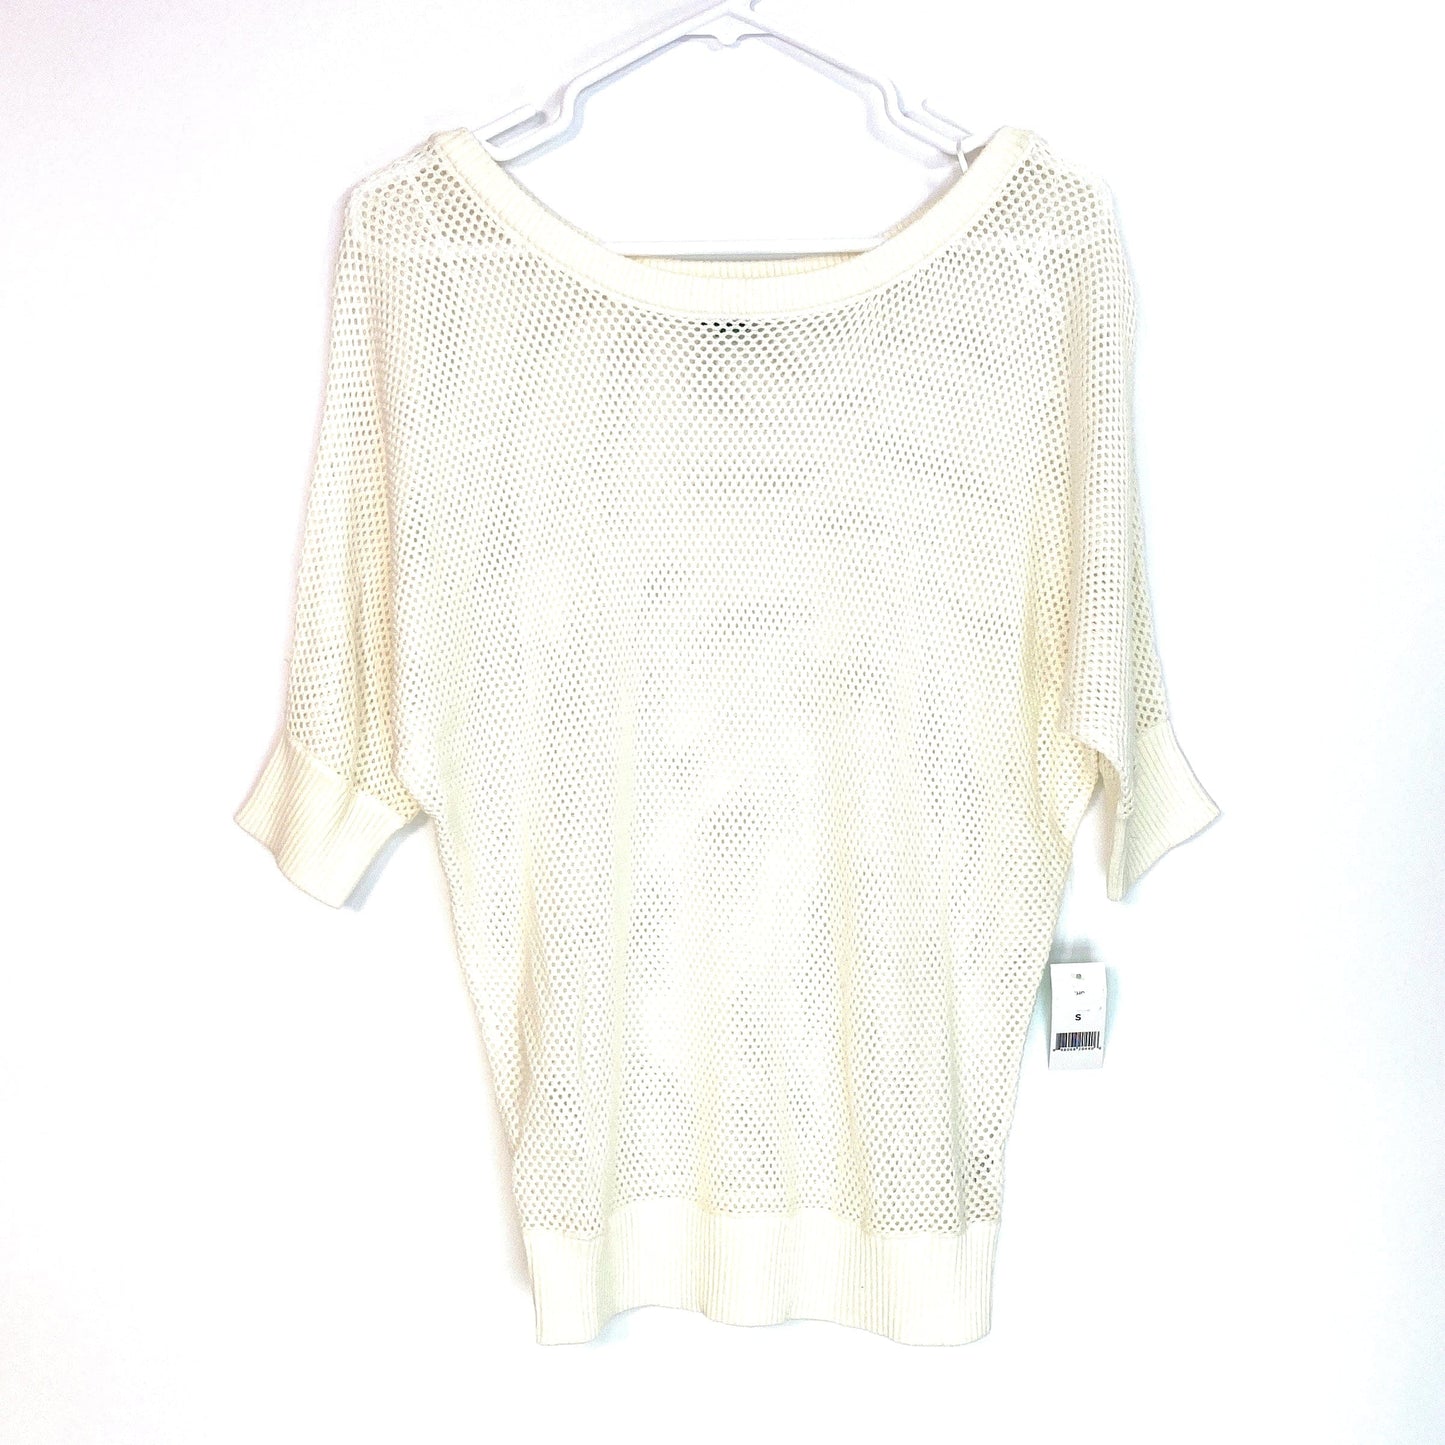 Dip Womens Size S White Mesh Sweater Top ½ Sleeve NWT